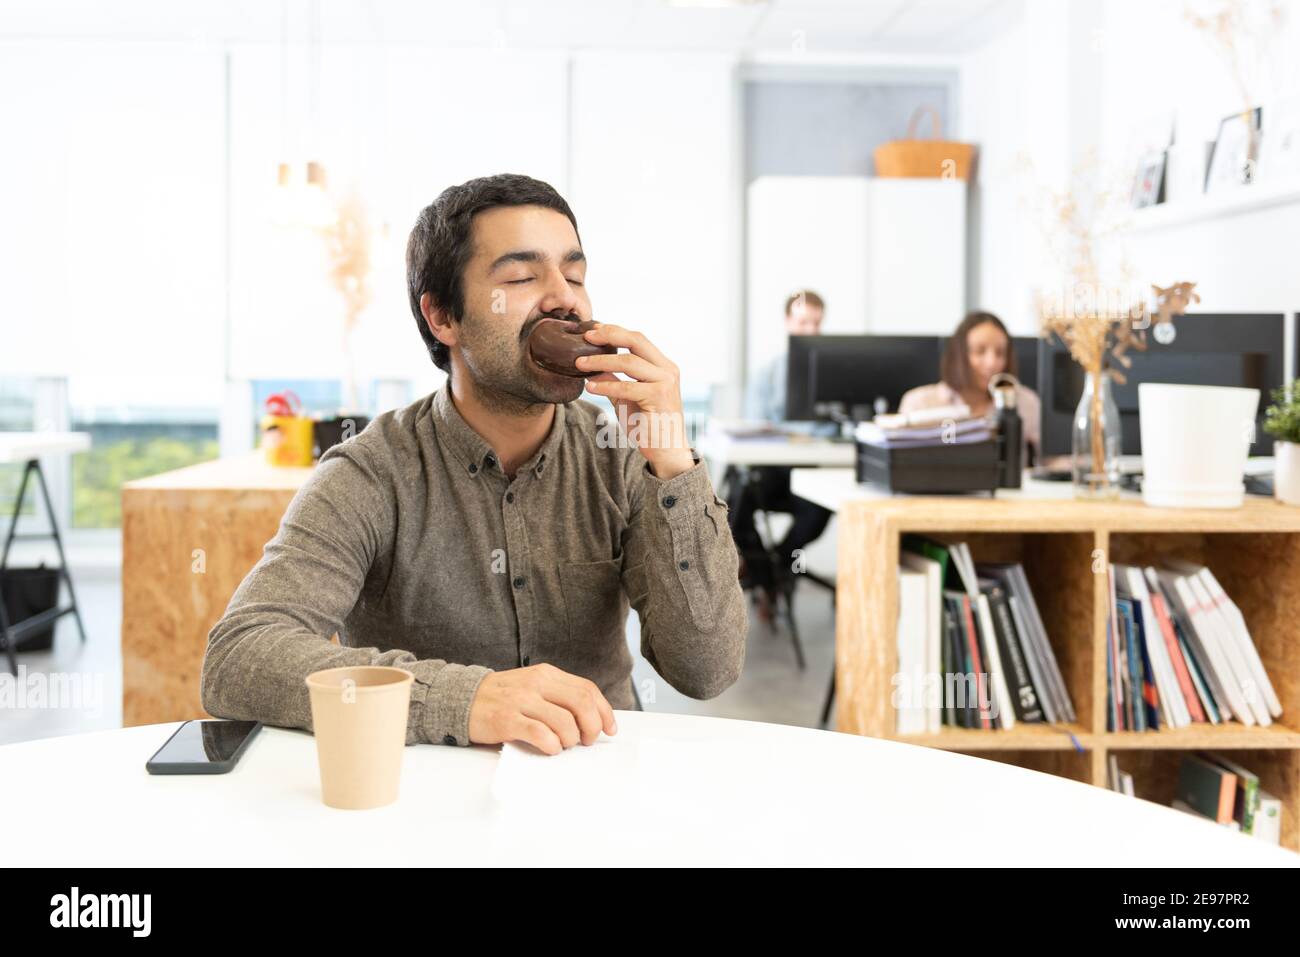 Hispanic man with mustache eating and enjoying a chocolate sweet bun. Unhealthy habits in the office concept. Stock Photo